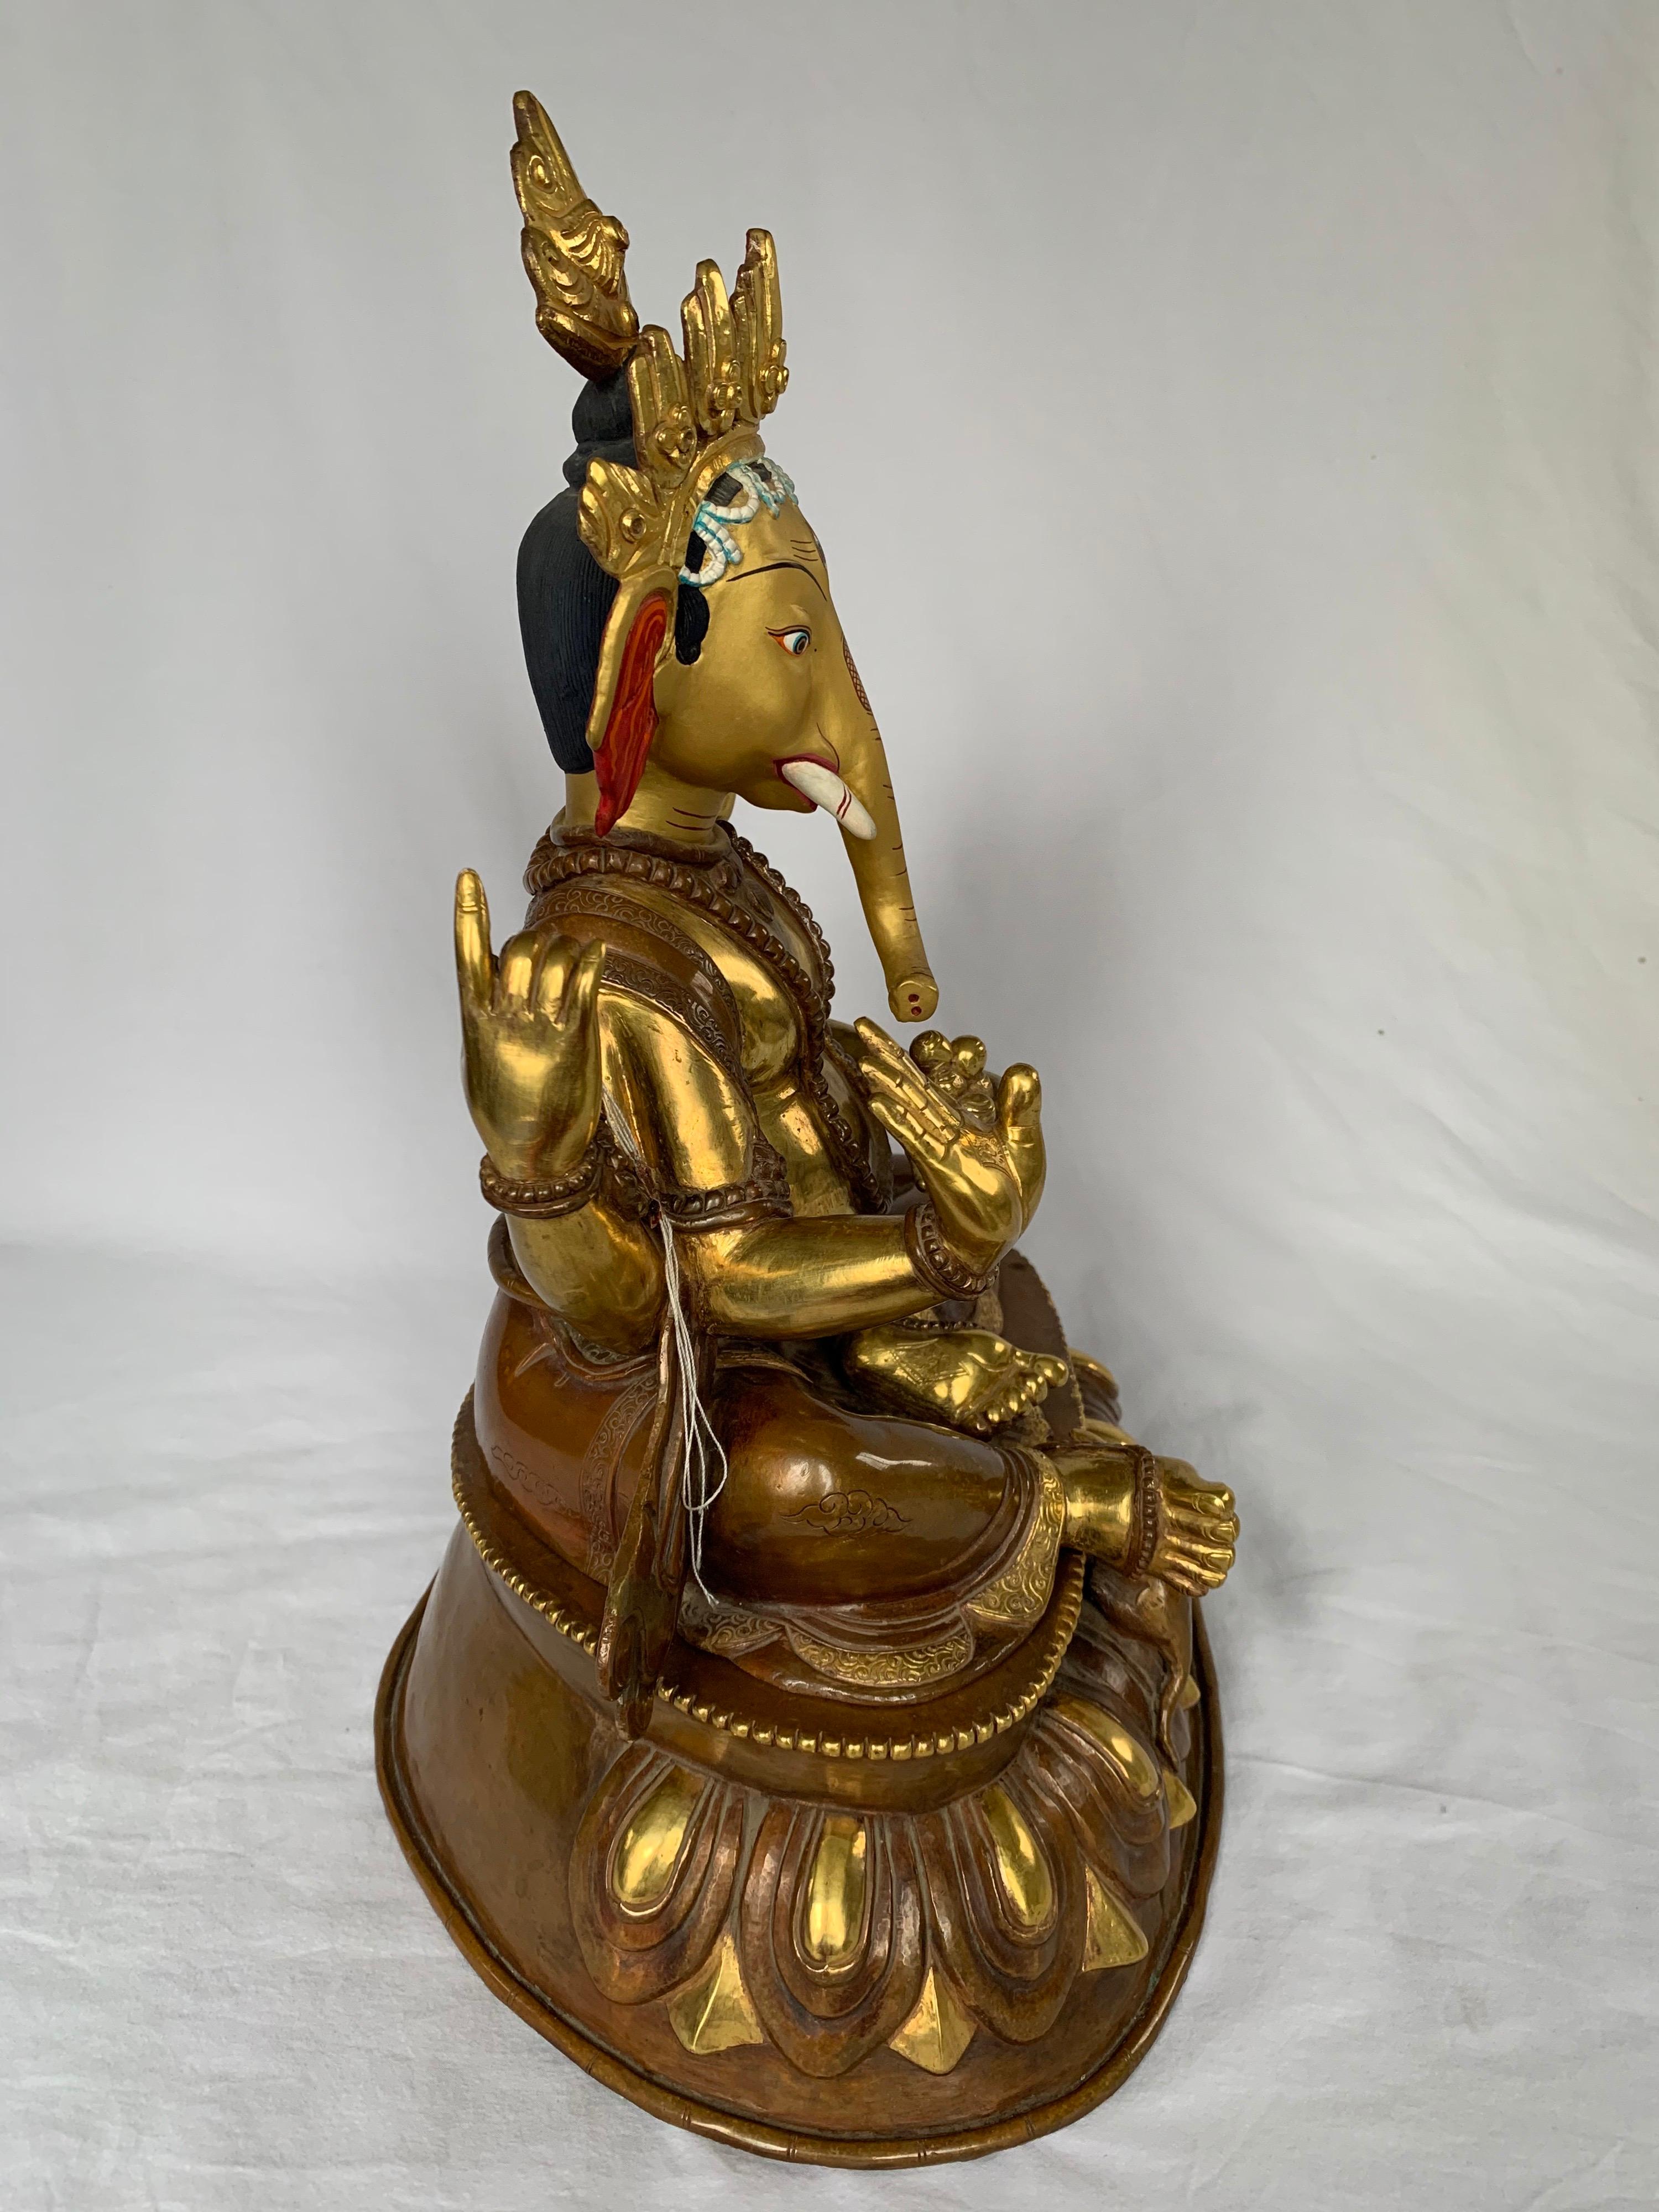  Ganesha Statue with 24 Carat Gold Handcrafted by Lost Wax Process - Other Art Style Sculpture by Unknown